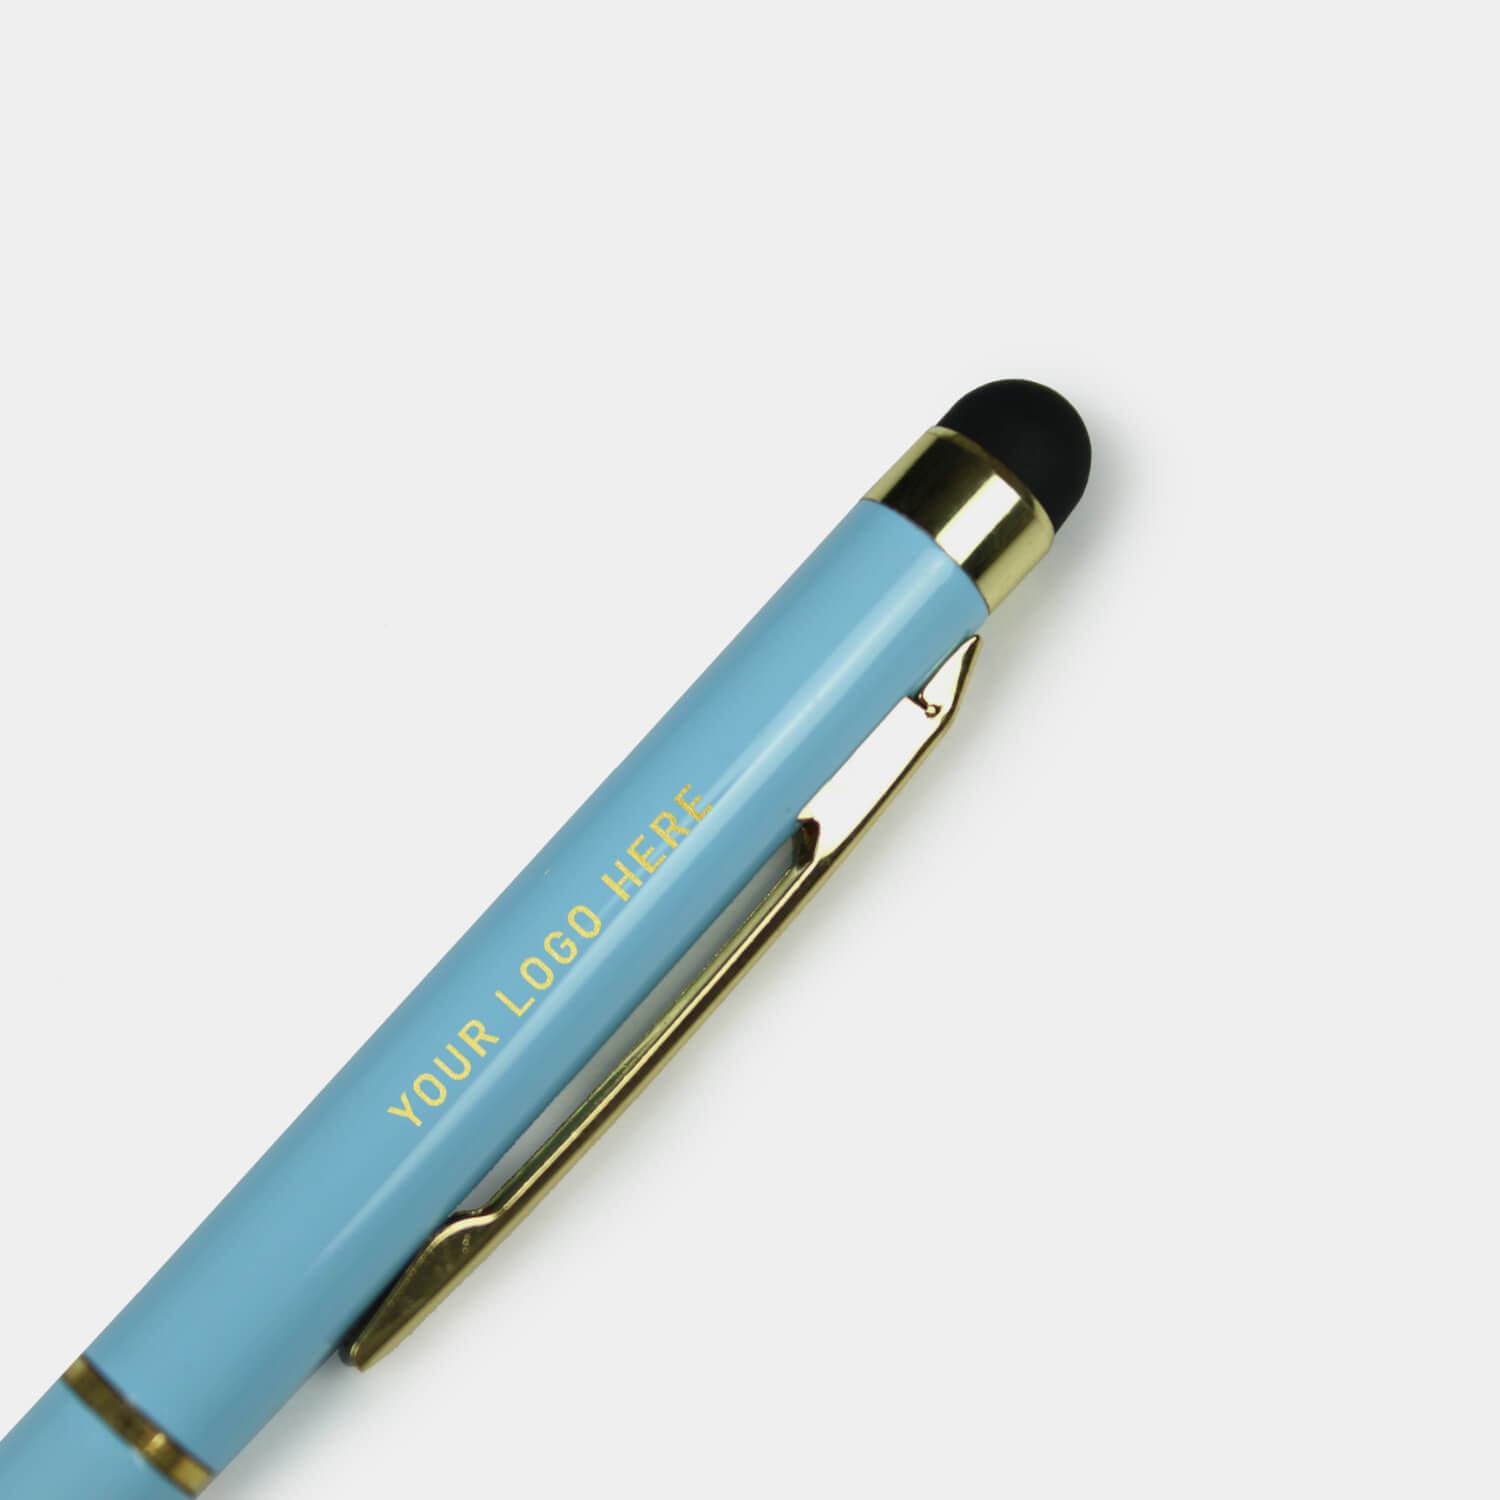 Slim ballpoint pen with aluminium alloy, metal alloy and rubber stylus, black and blue inc. Engraved with your company logo